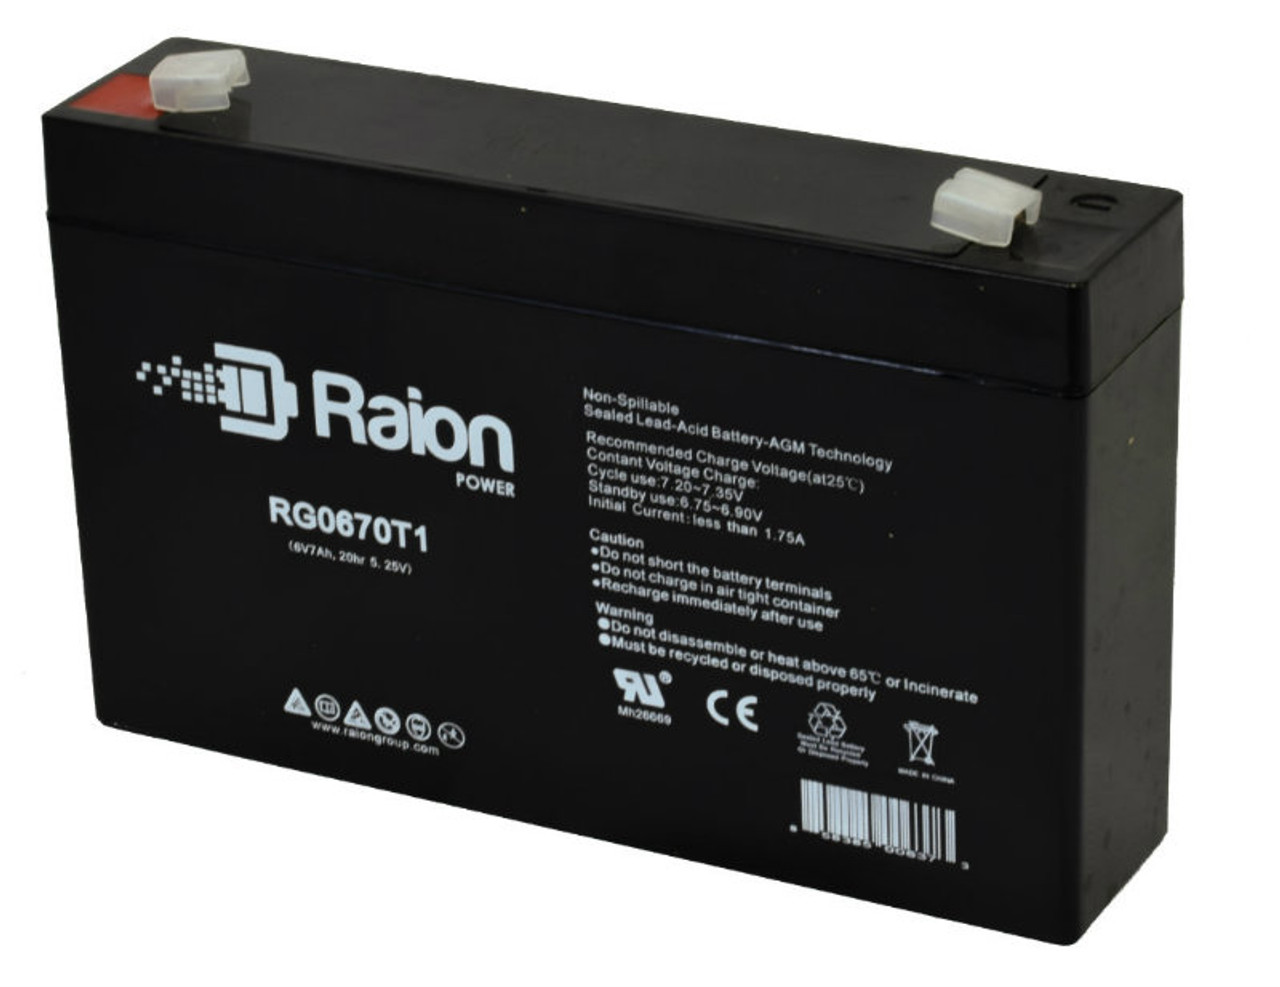 Raion Power RG0670T1 Replacement Battery for Sonnenschein 6V6AH OEM Battery